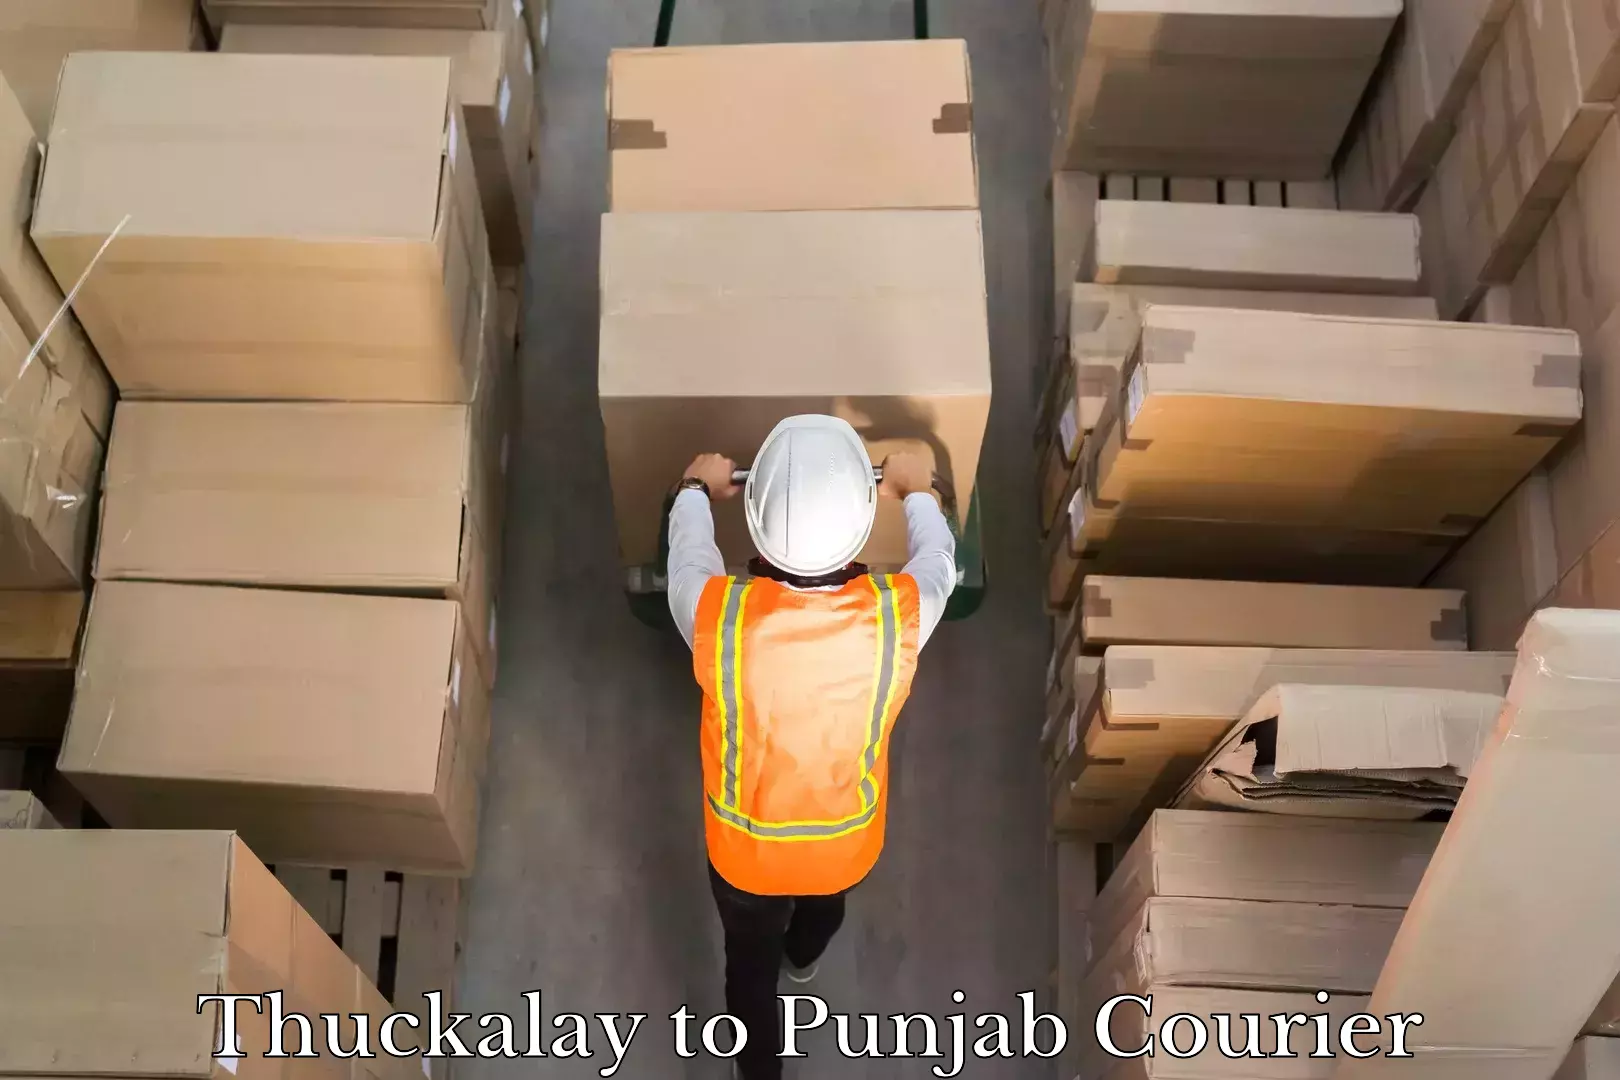 Personalized courier experiences Thuckalay to Punjab